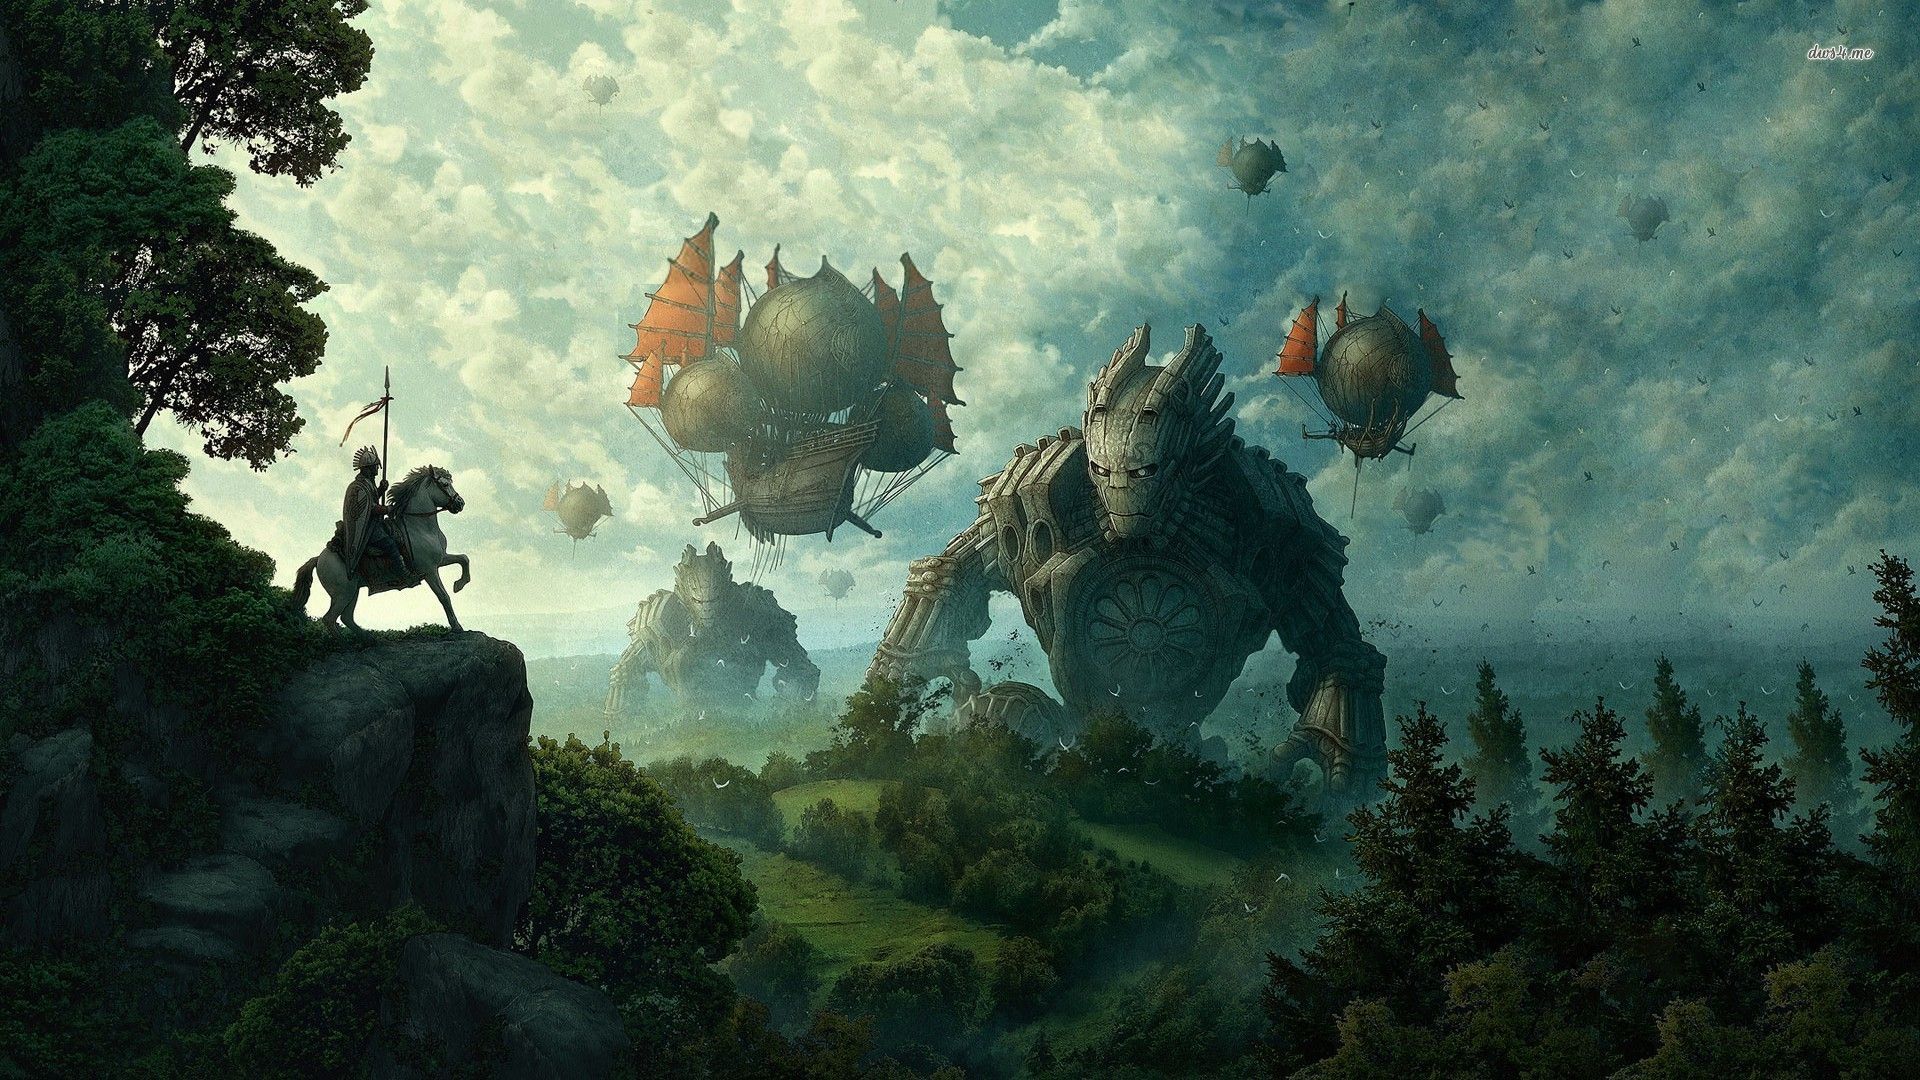 General 1920x1080 robot horse pine trees clouds fantasy art medieval birds